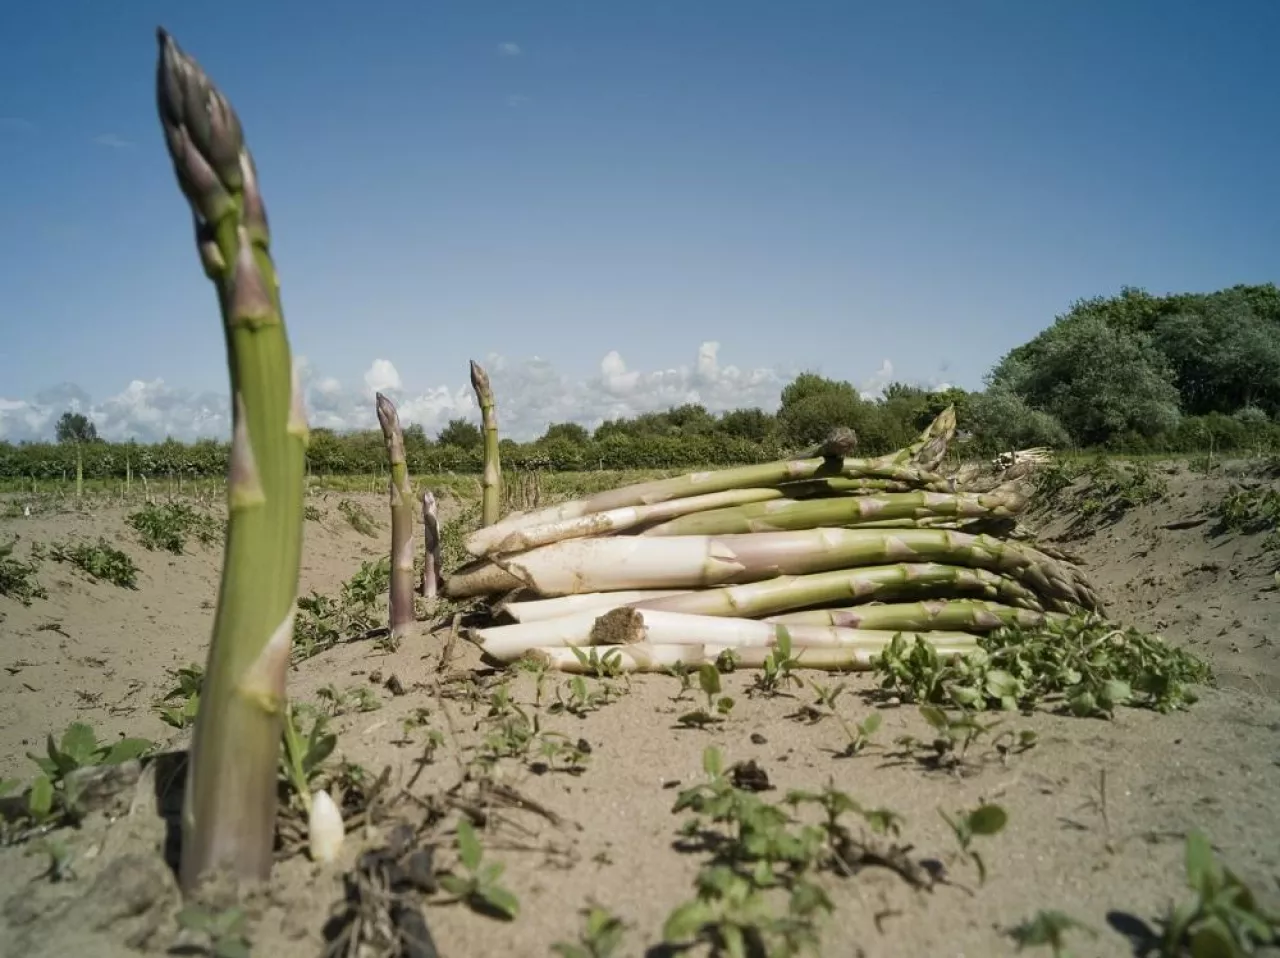 Asparagus growing in sandy field, Formby, England